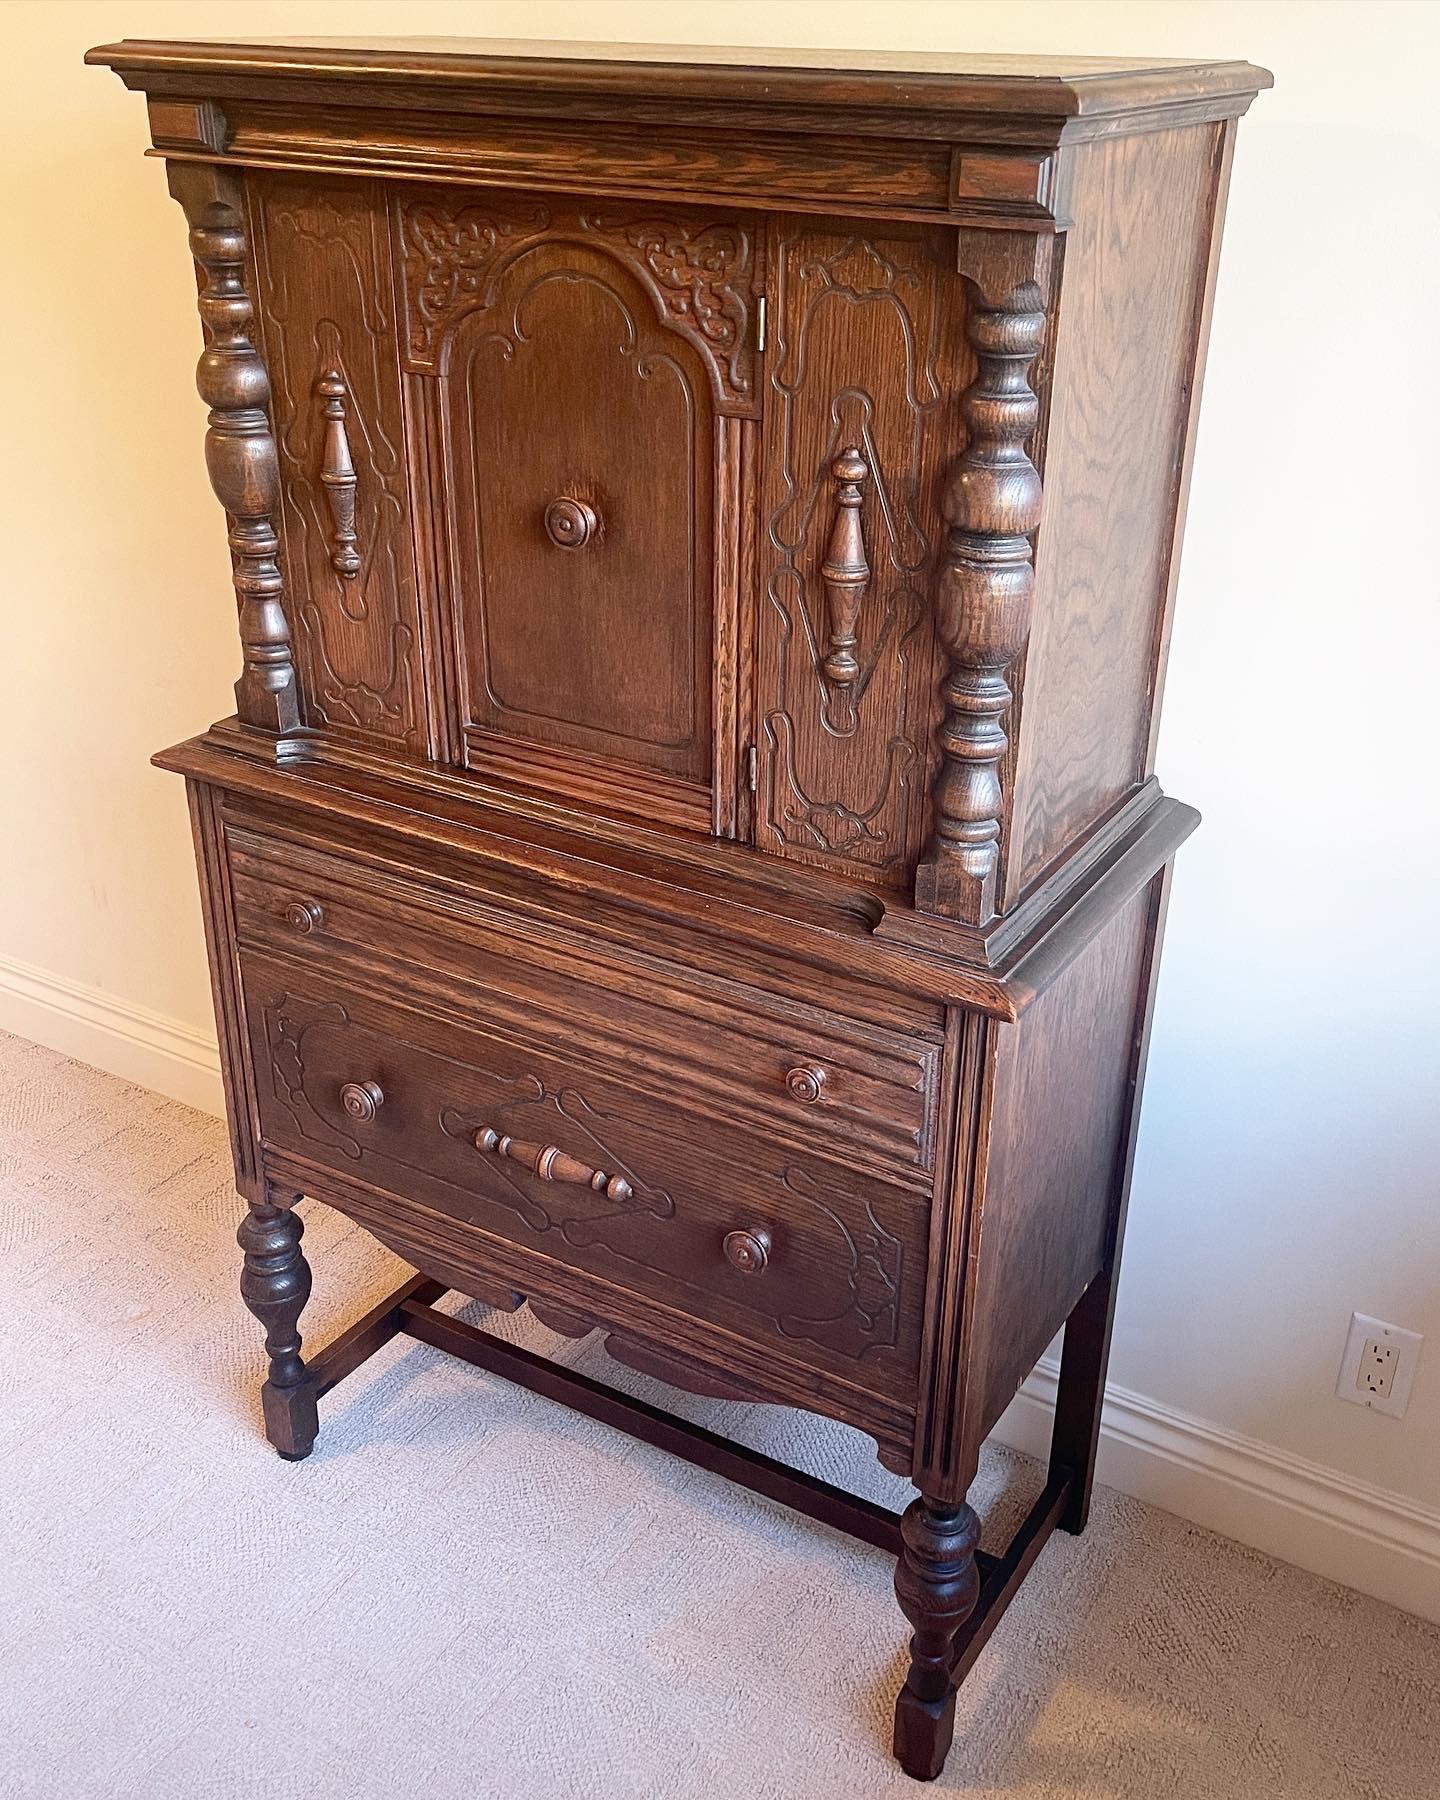 Incredible 19th century wooden cabinet. Features a hand carved design through the front face of the structure.
 